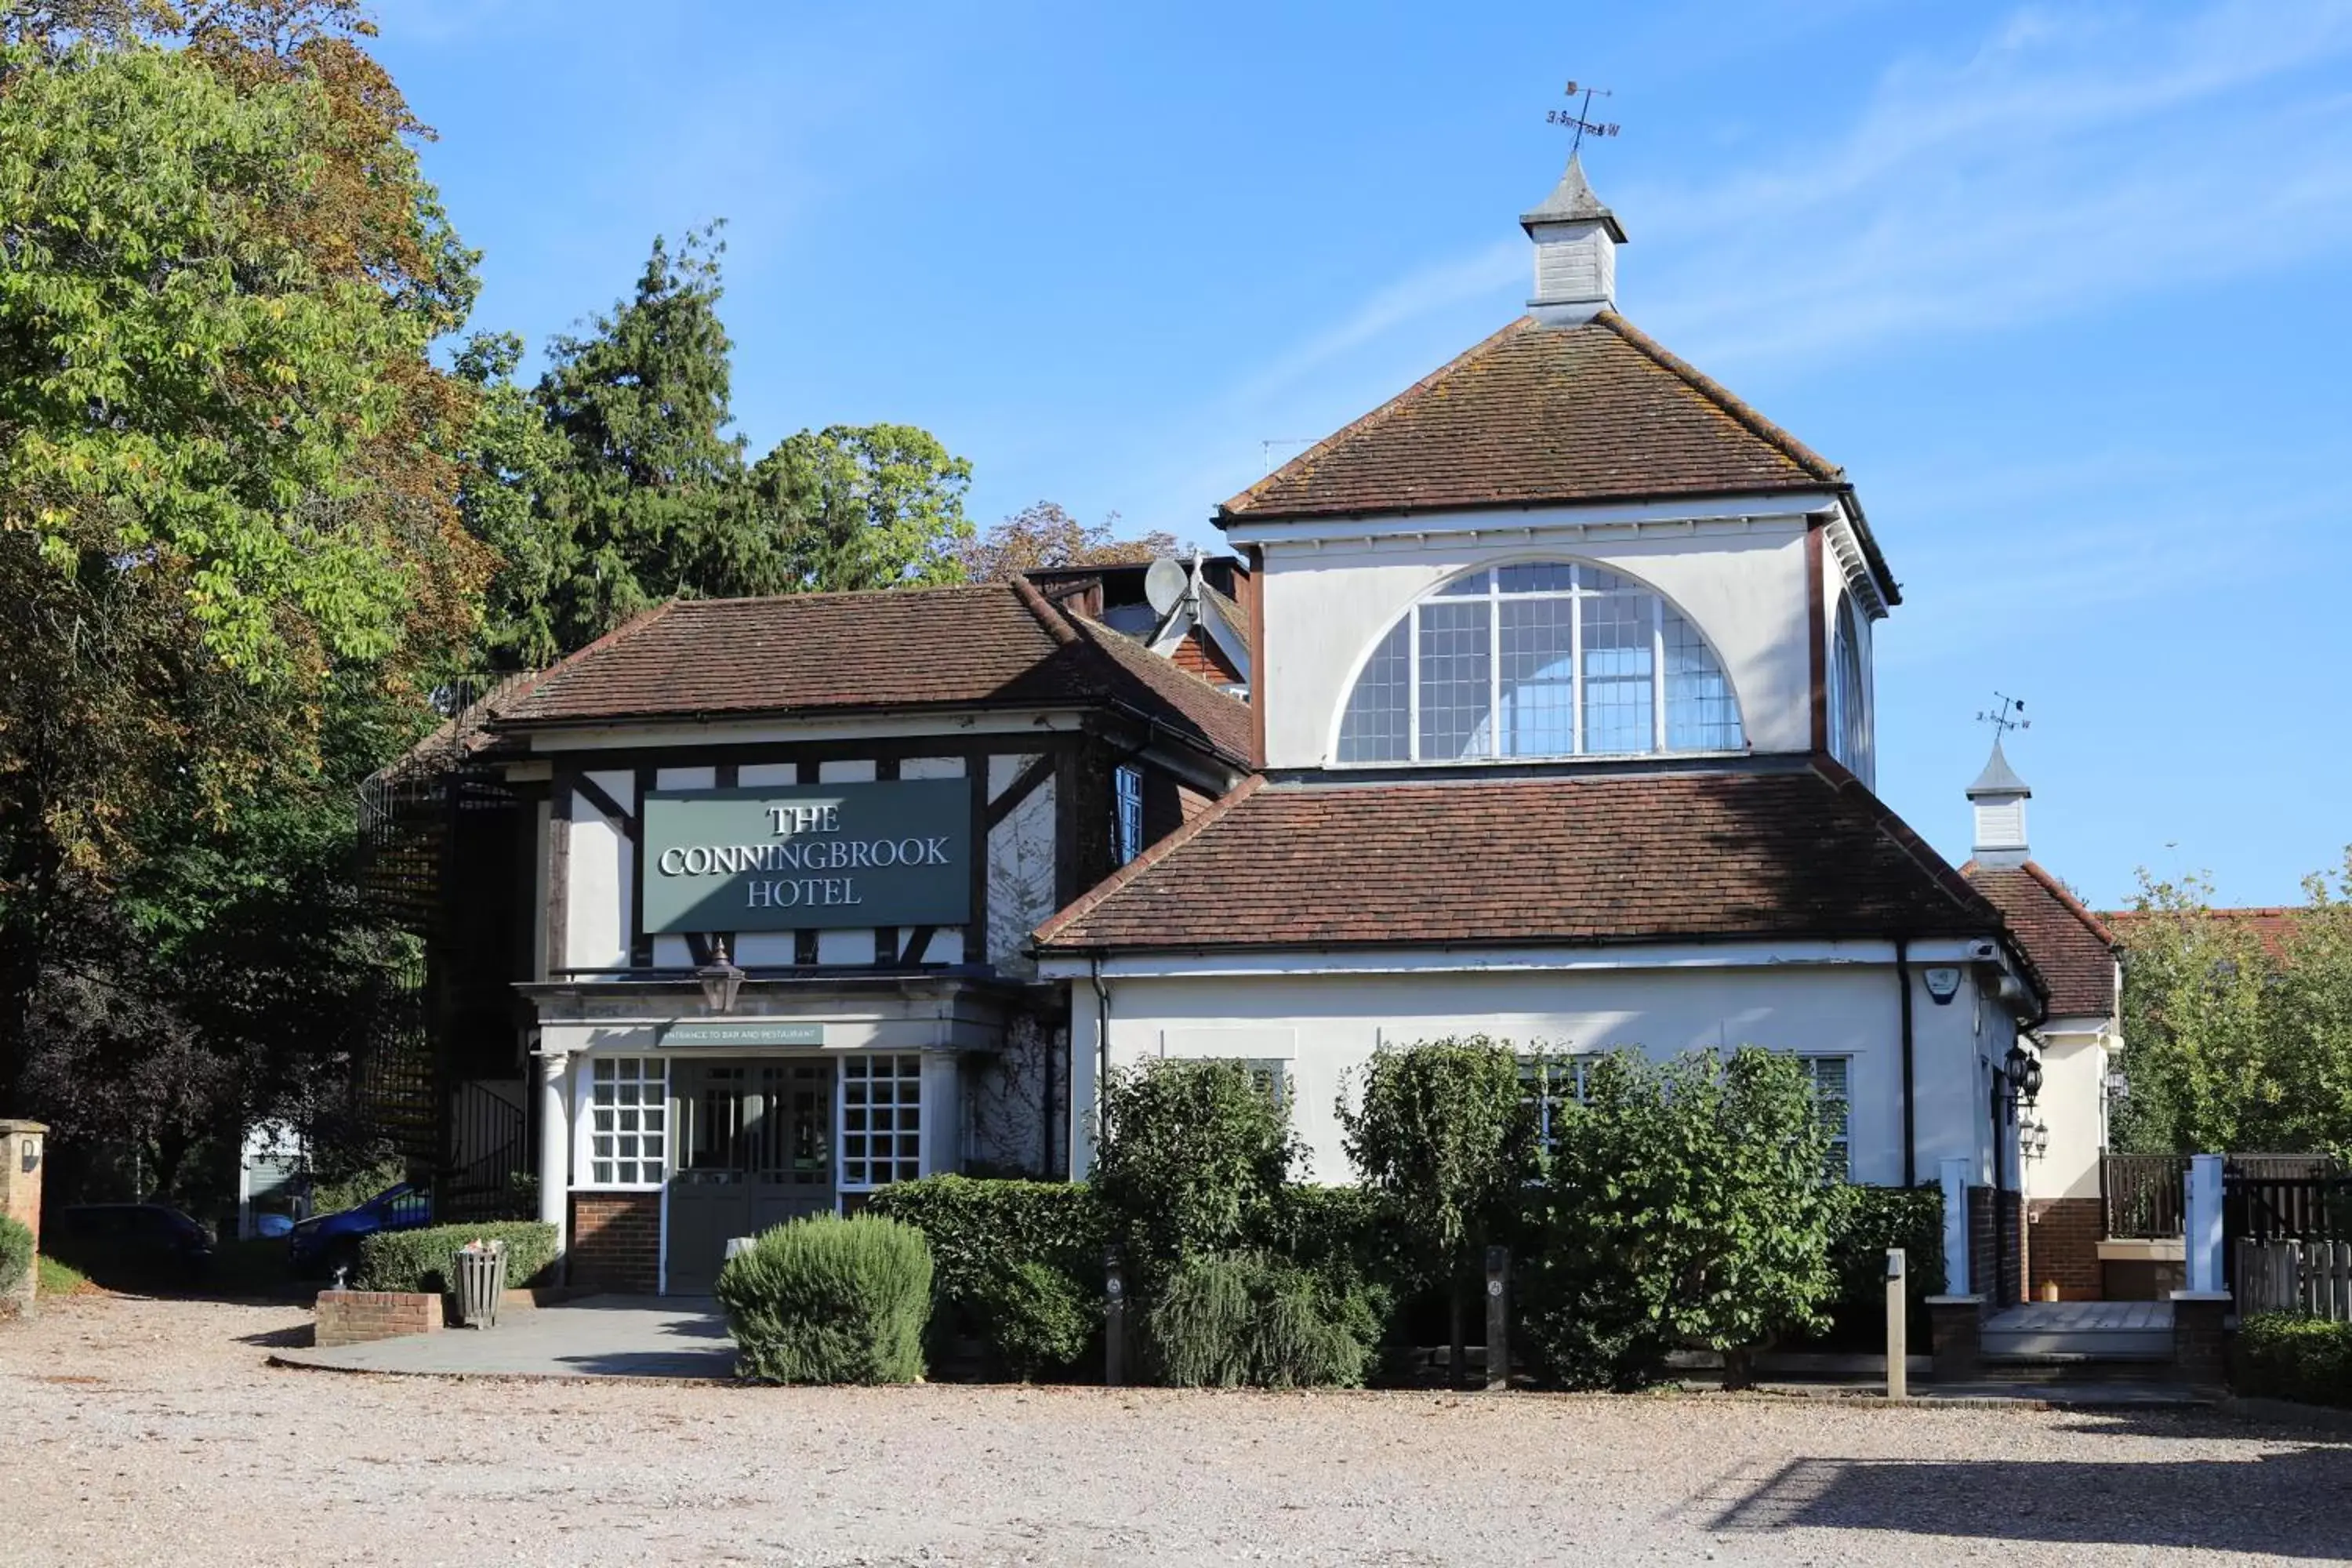 Property Building in The Conningbrook Hotel